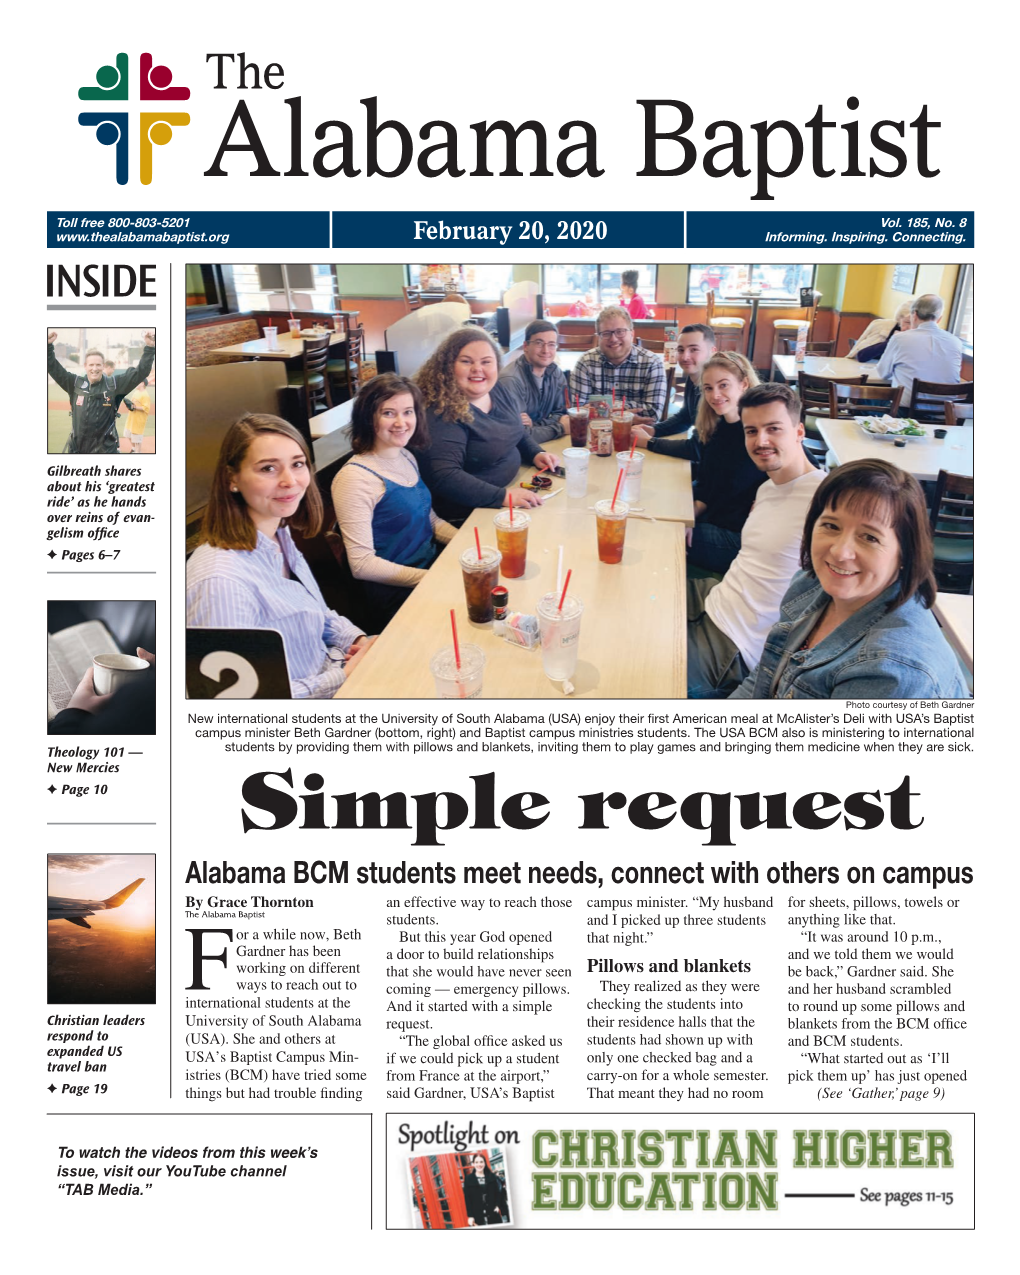 Simple Request Alabama BCM Students Meet Needs, Connect with Others on Campus by Grace Thornton an Effective Way to Reach Those Campus Minister